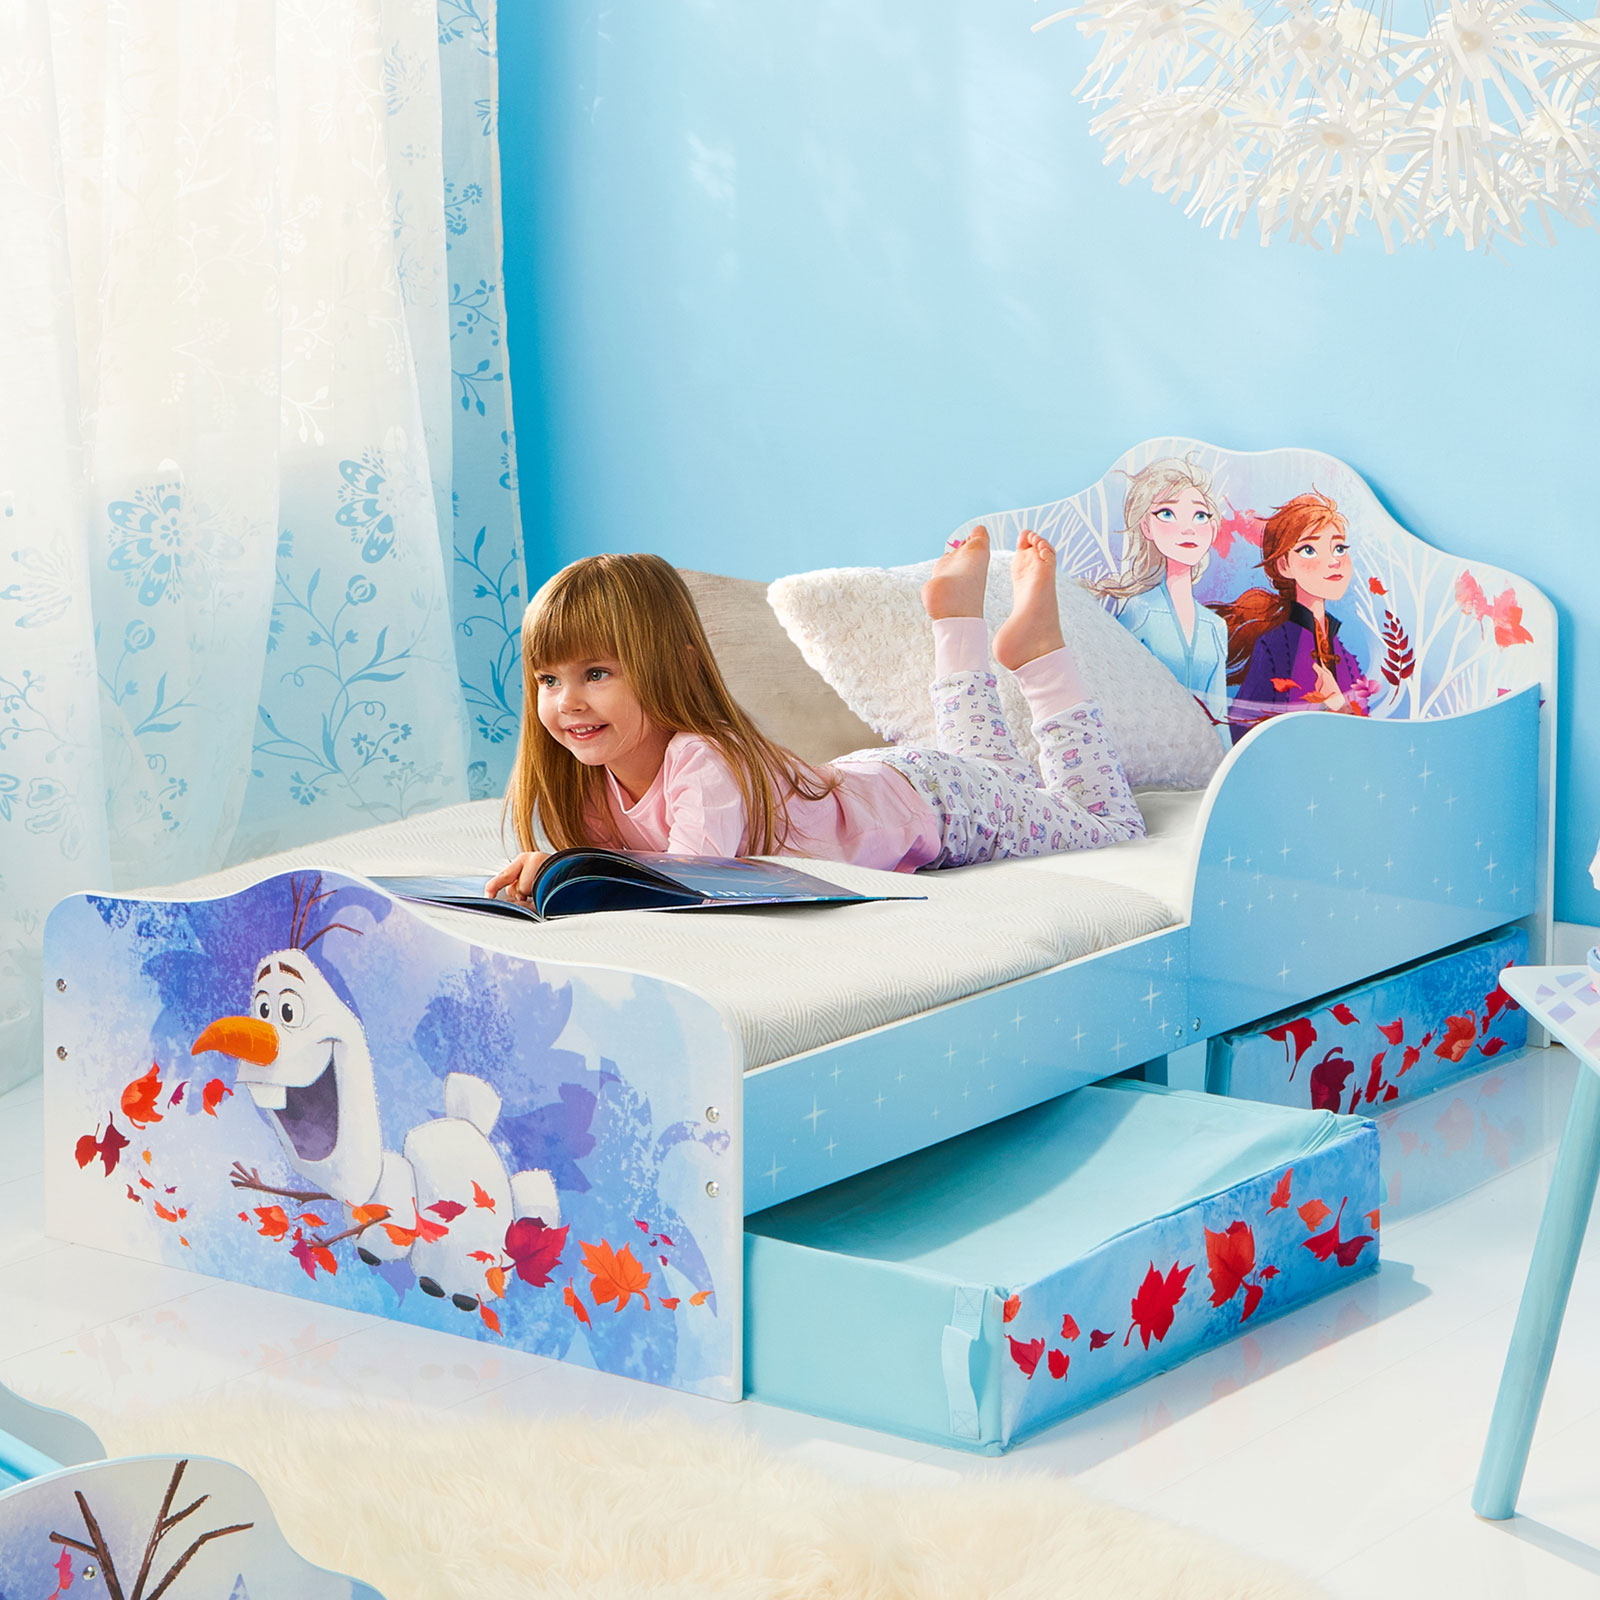 A Guide To Frozen Themed Bedrooms That Will Transform Your Kids’ Bedroom Into A Magical Kingdom